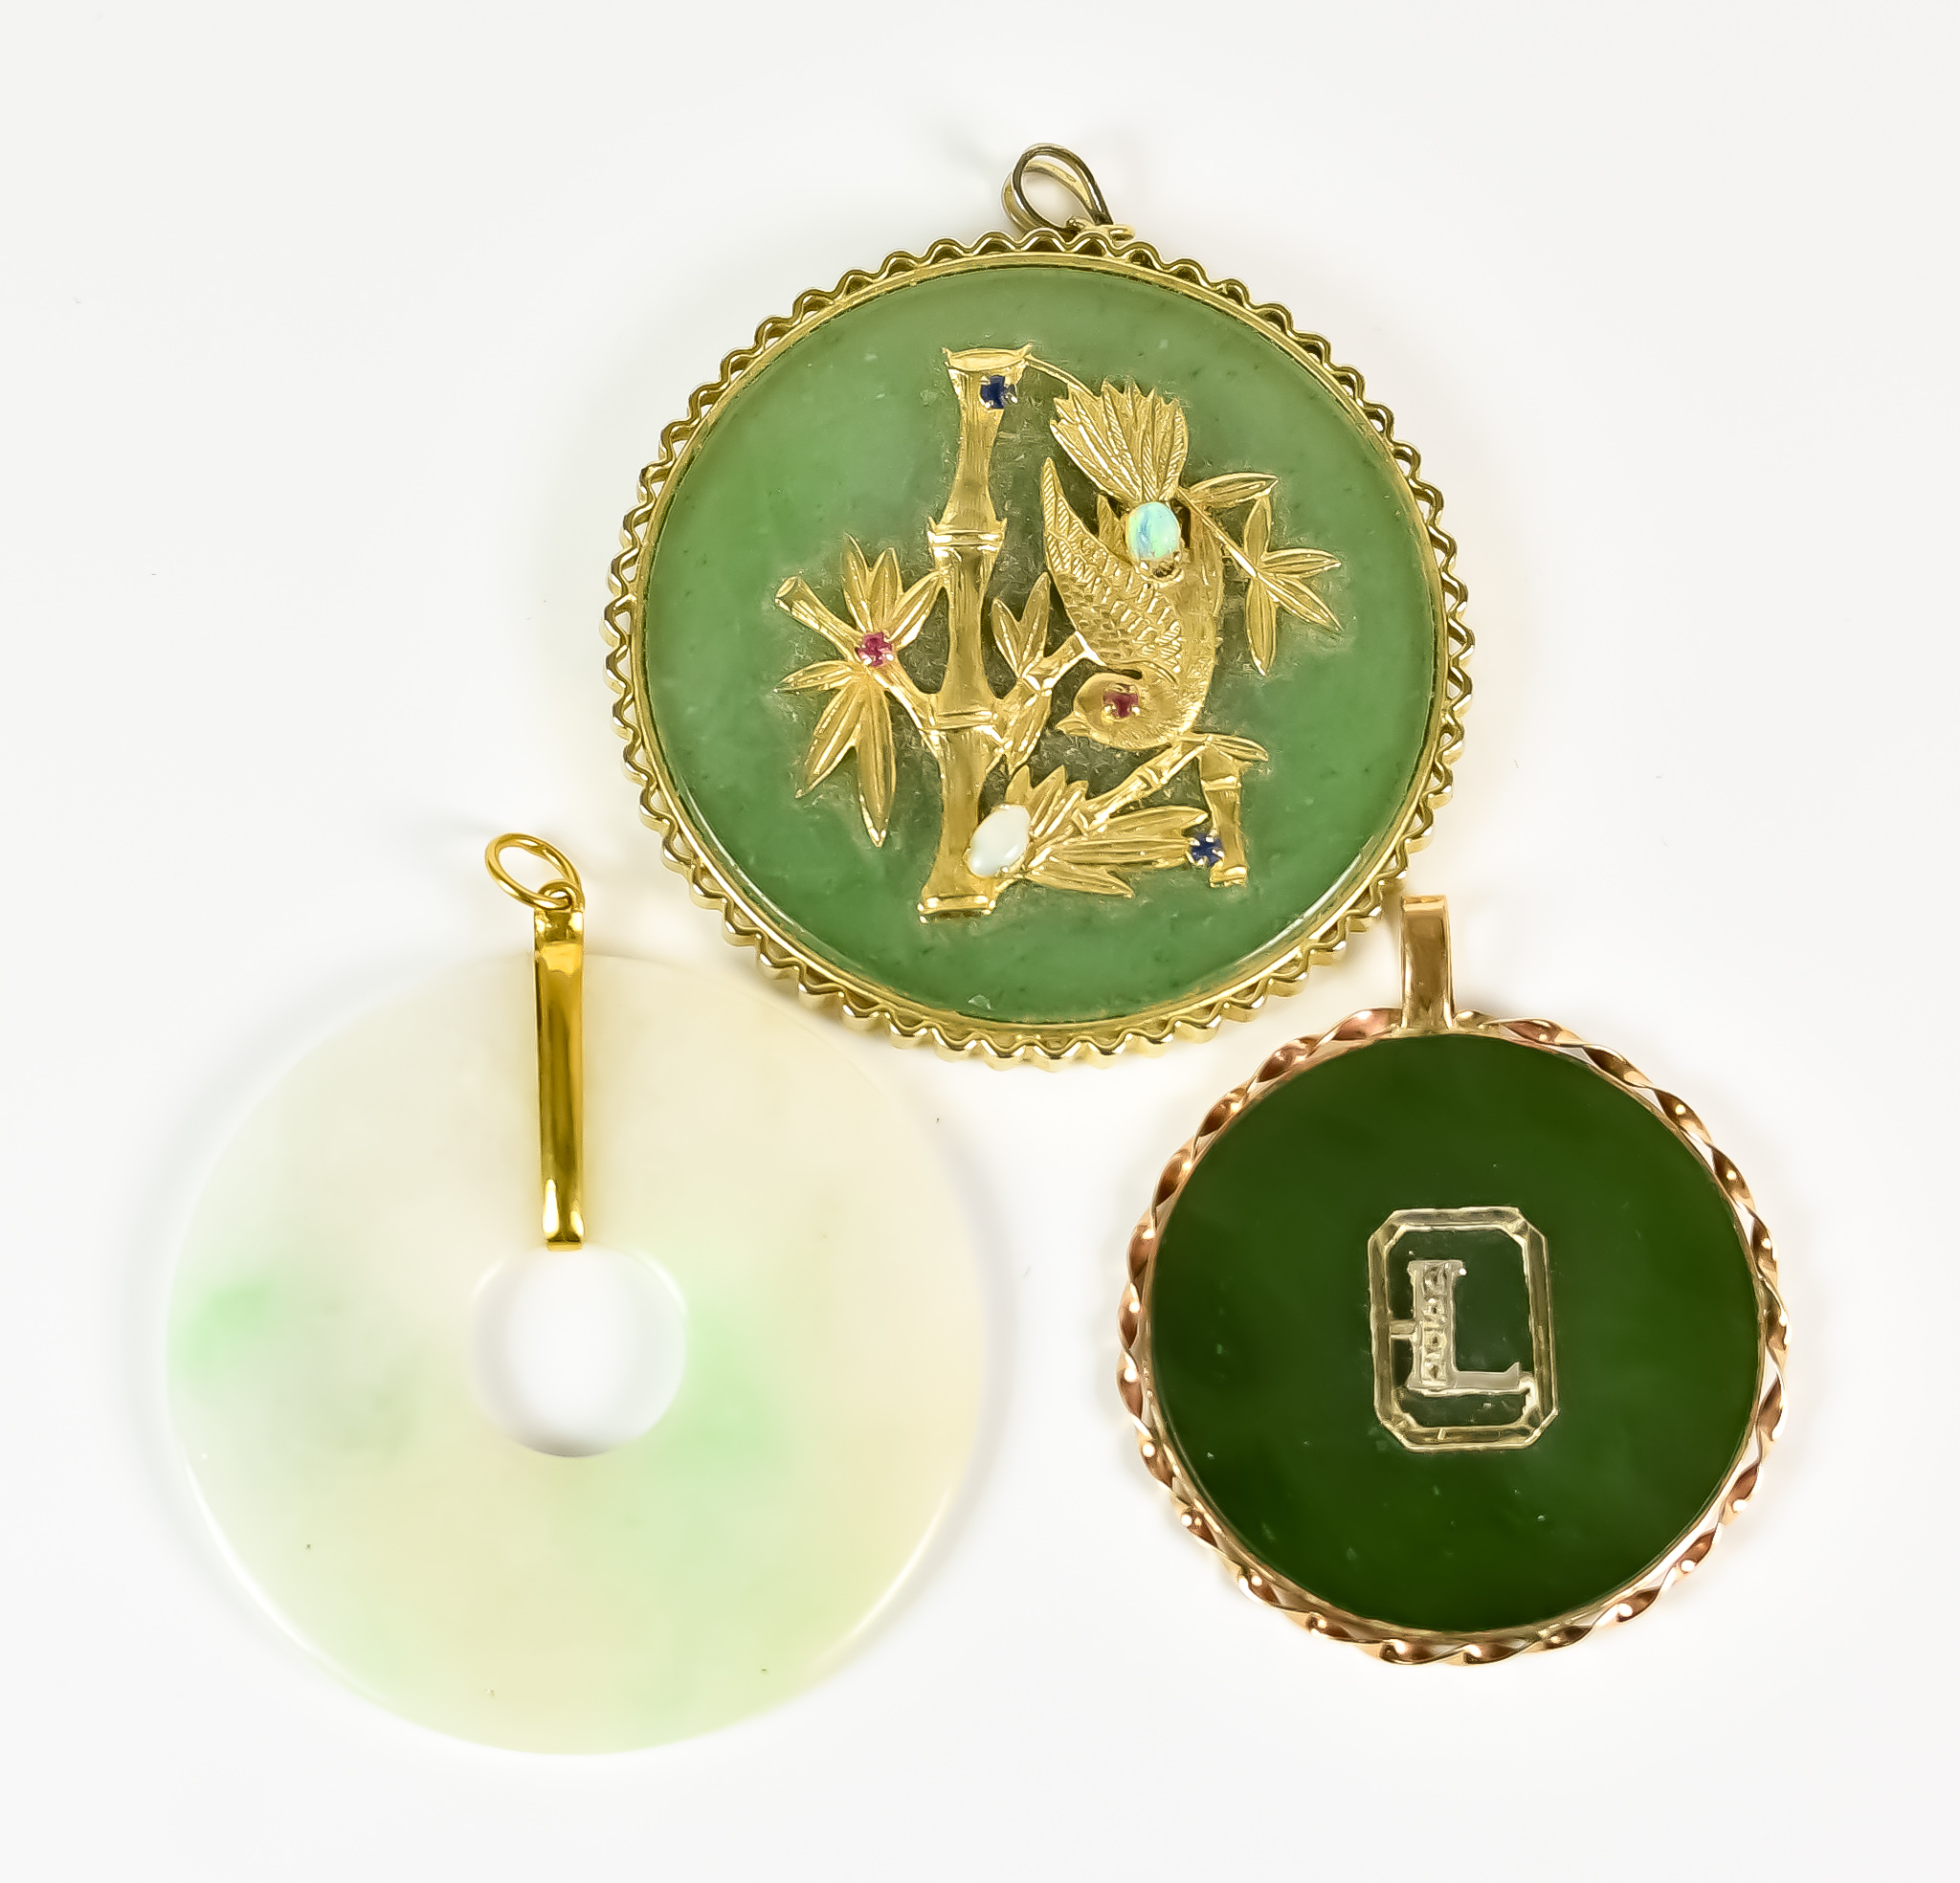 Three Oriental Jade Pendants, 20th Century, one depicting a bird in bamboo set with small gems, 55mm